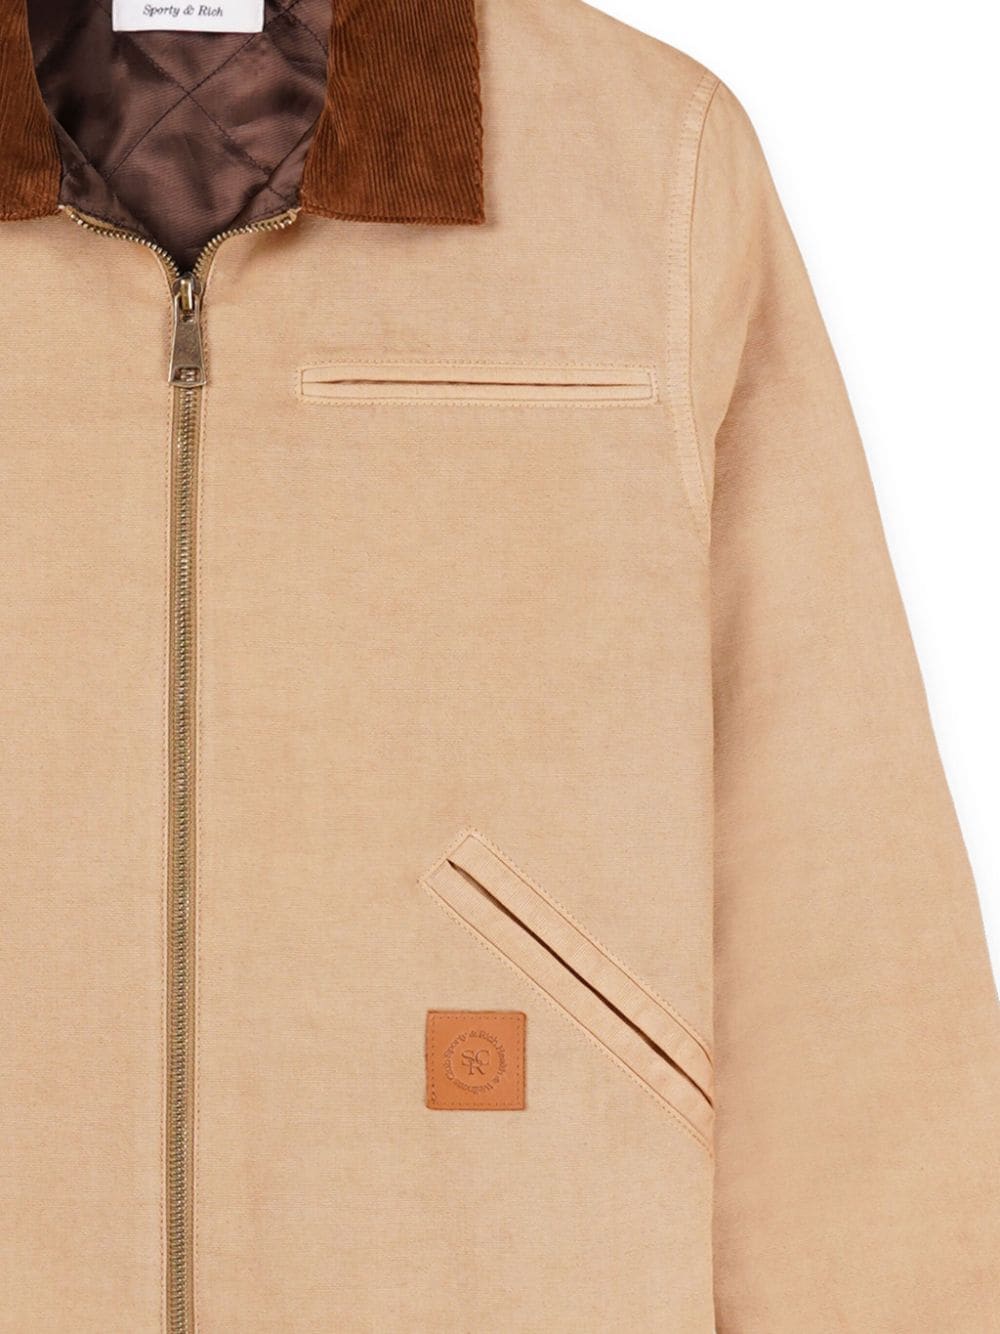 Shop Sporty And Rich Srhwc Canvas Zipped Jacket In Neutrals